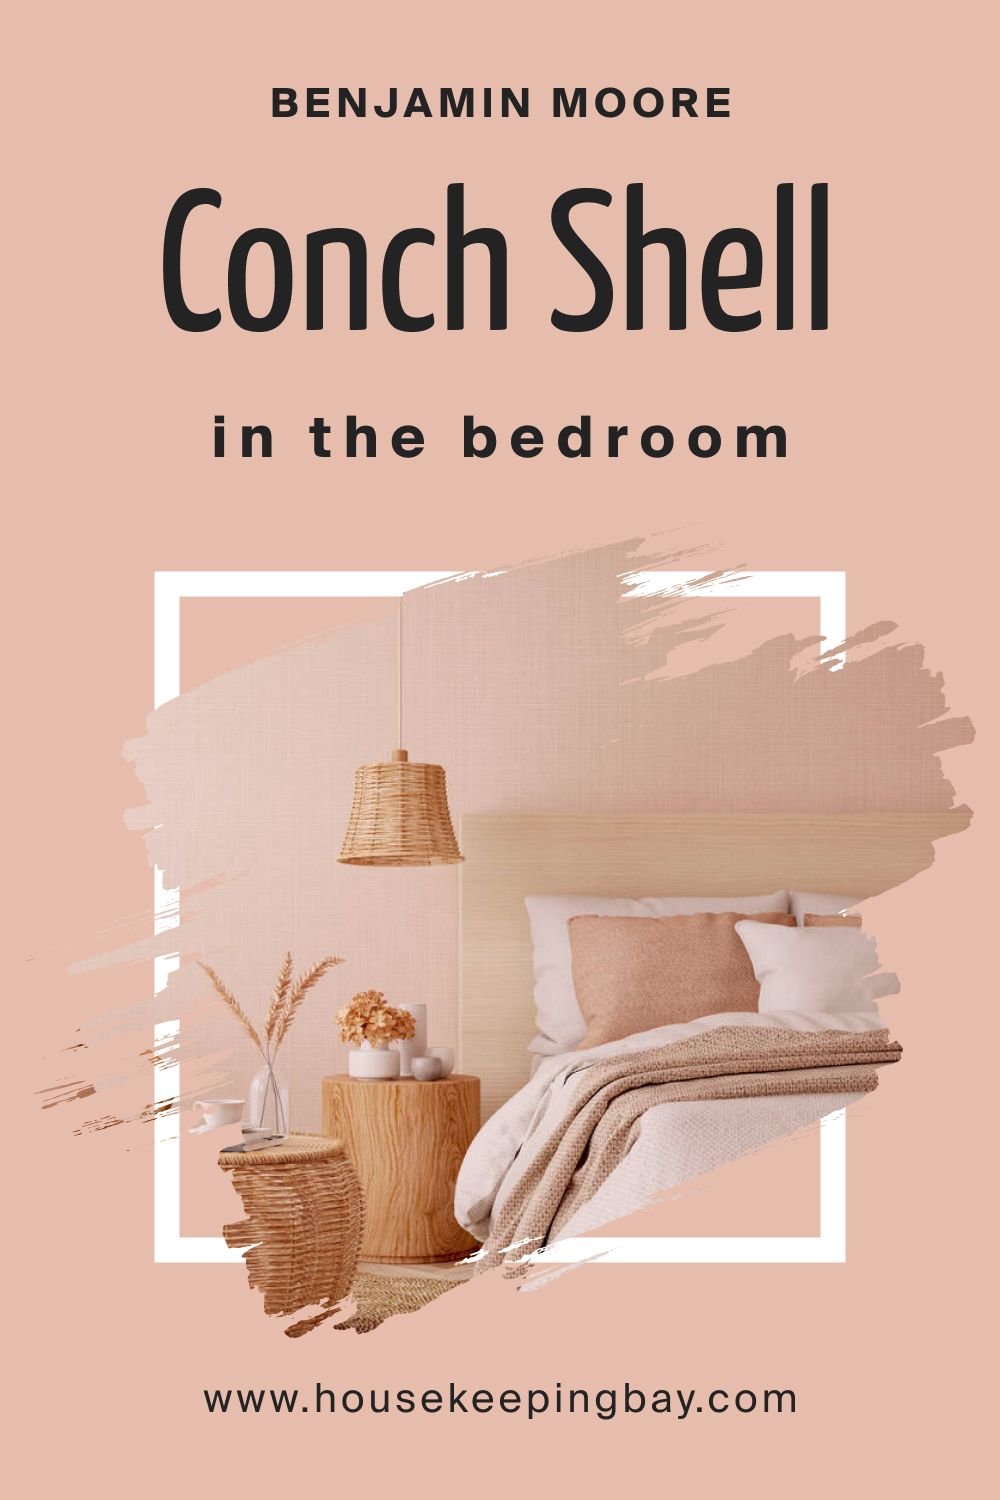 Benjamin Moore. Conch Shell 052 for the Bedroom